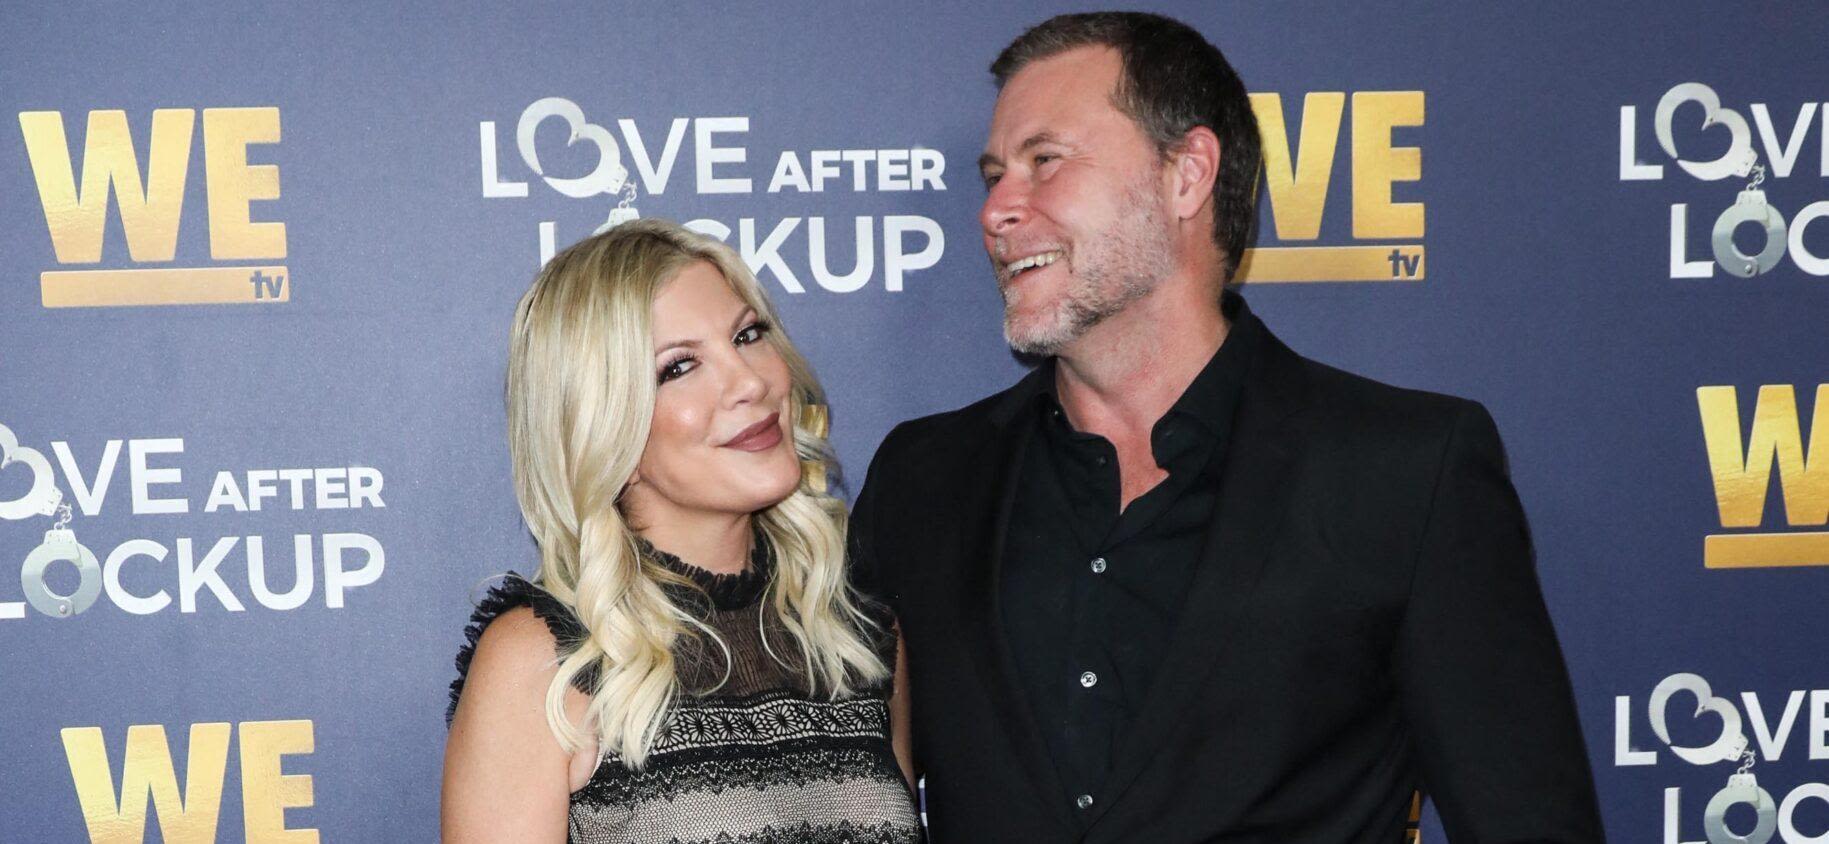 Tori Spelling Reveals She Will 'Have To Go On OnlyFans' To Pay For Her Five Kids' College Tuition